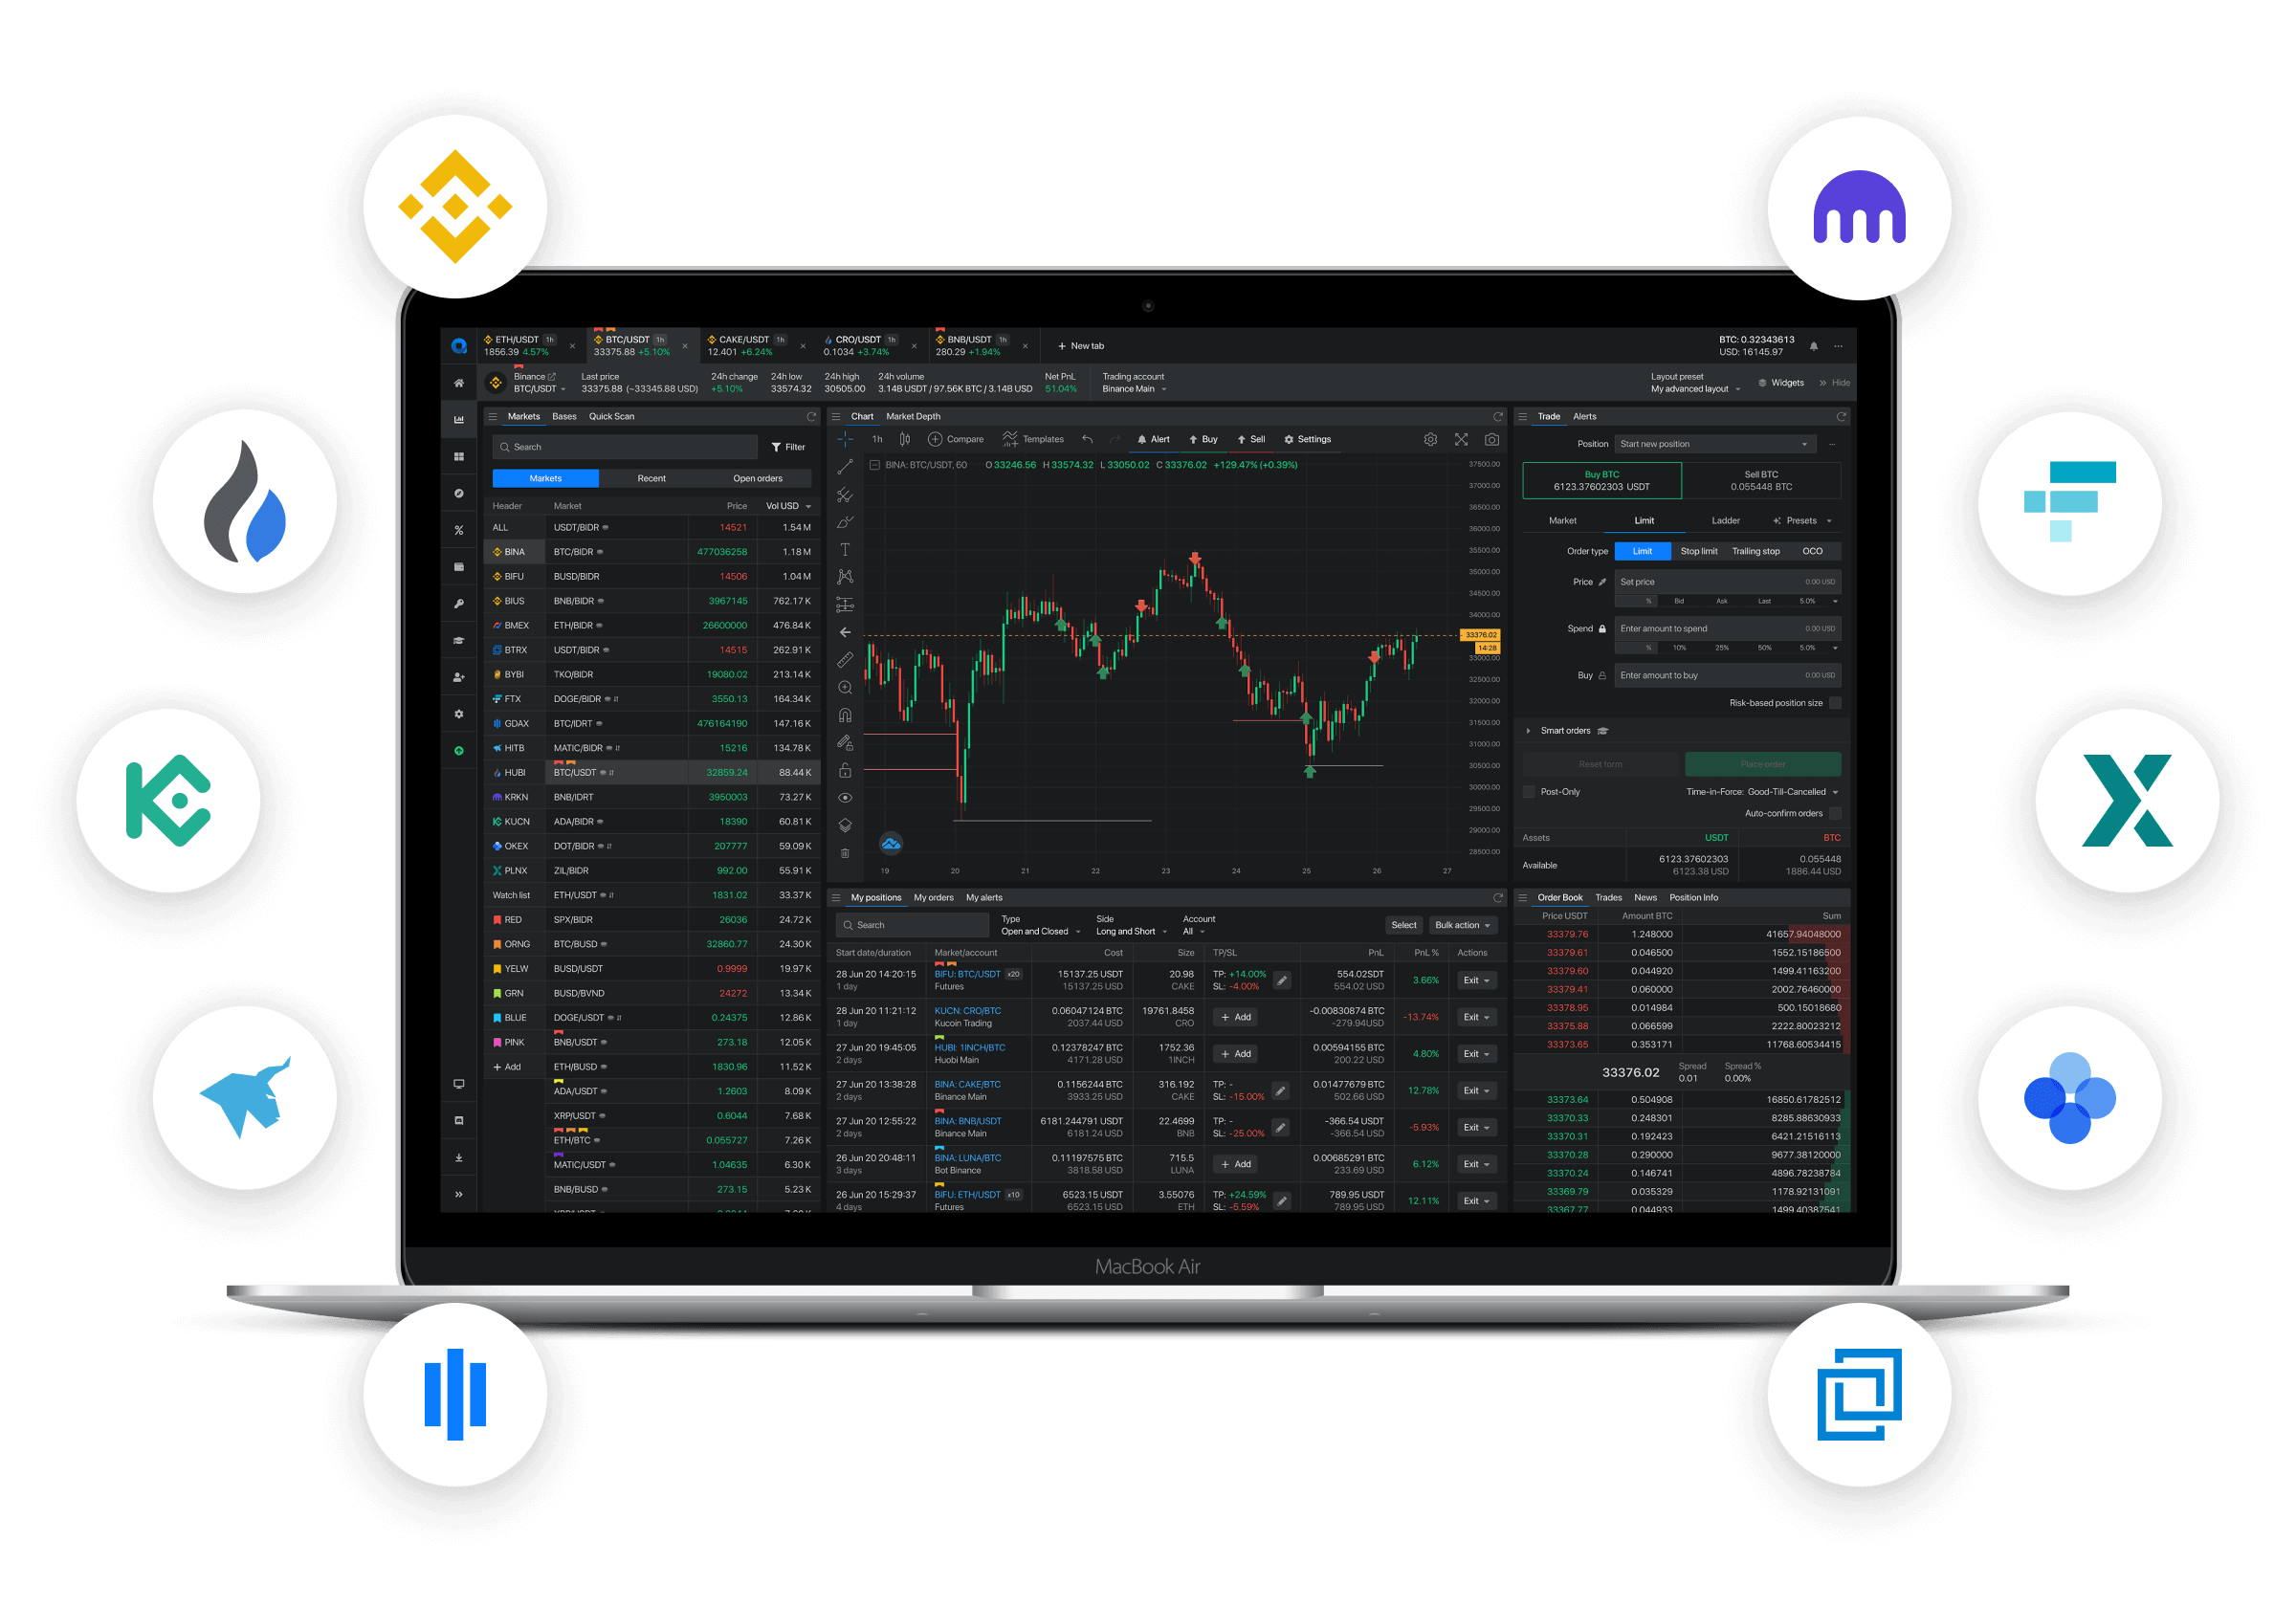 Single platform to trade on multiple exchanges.